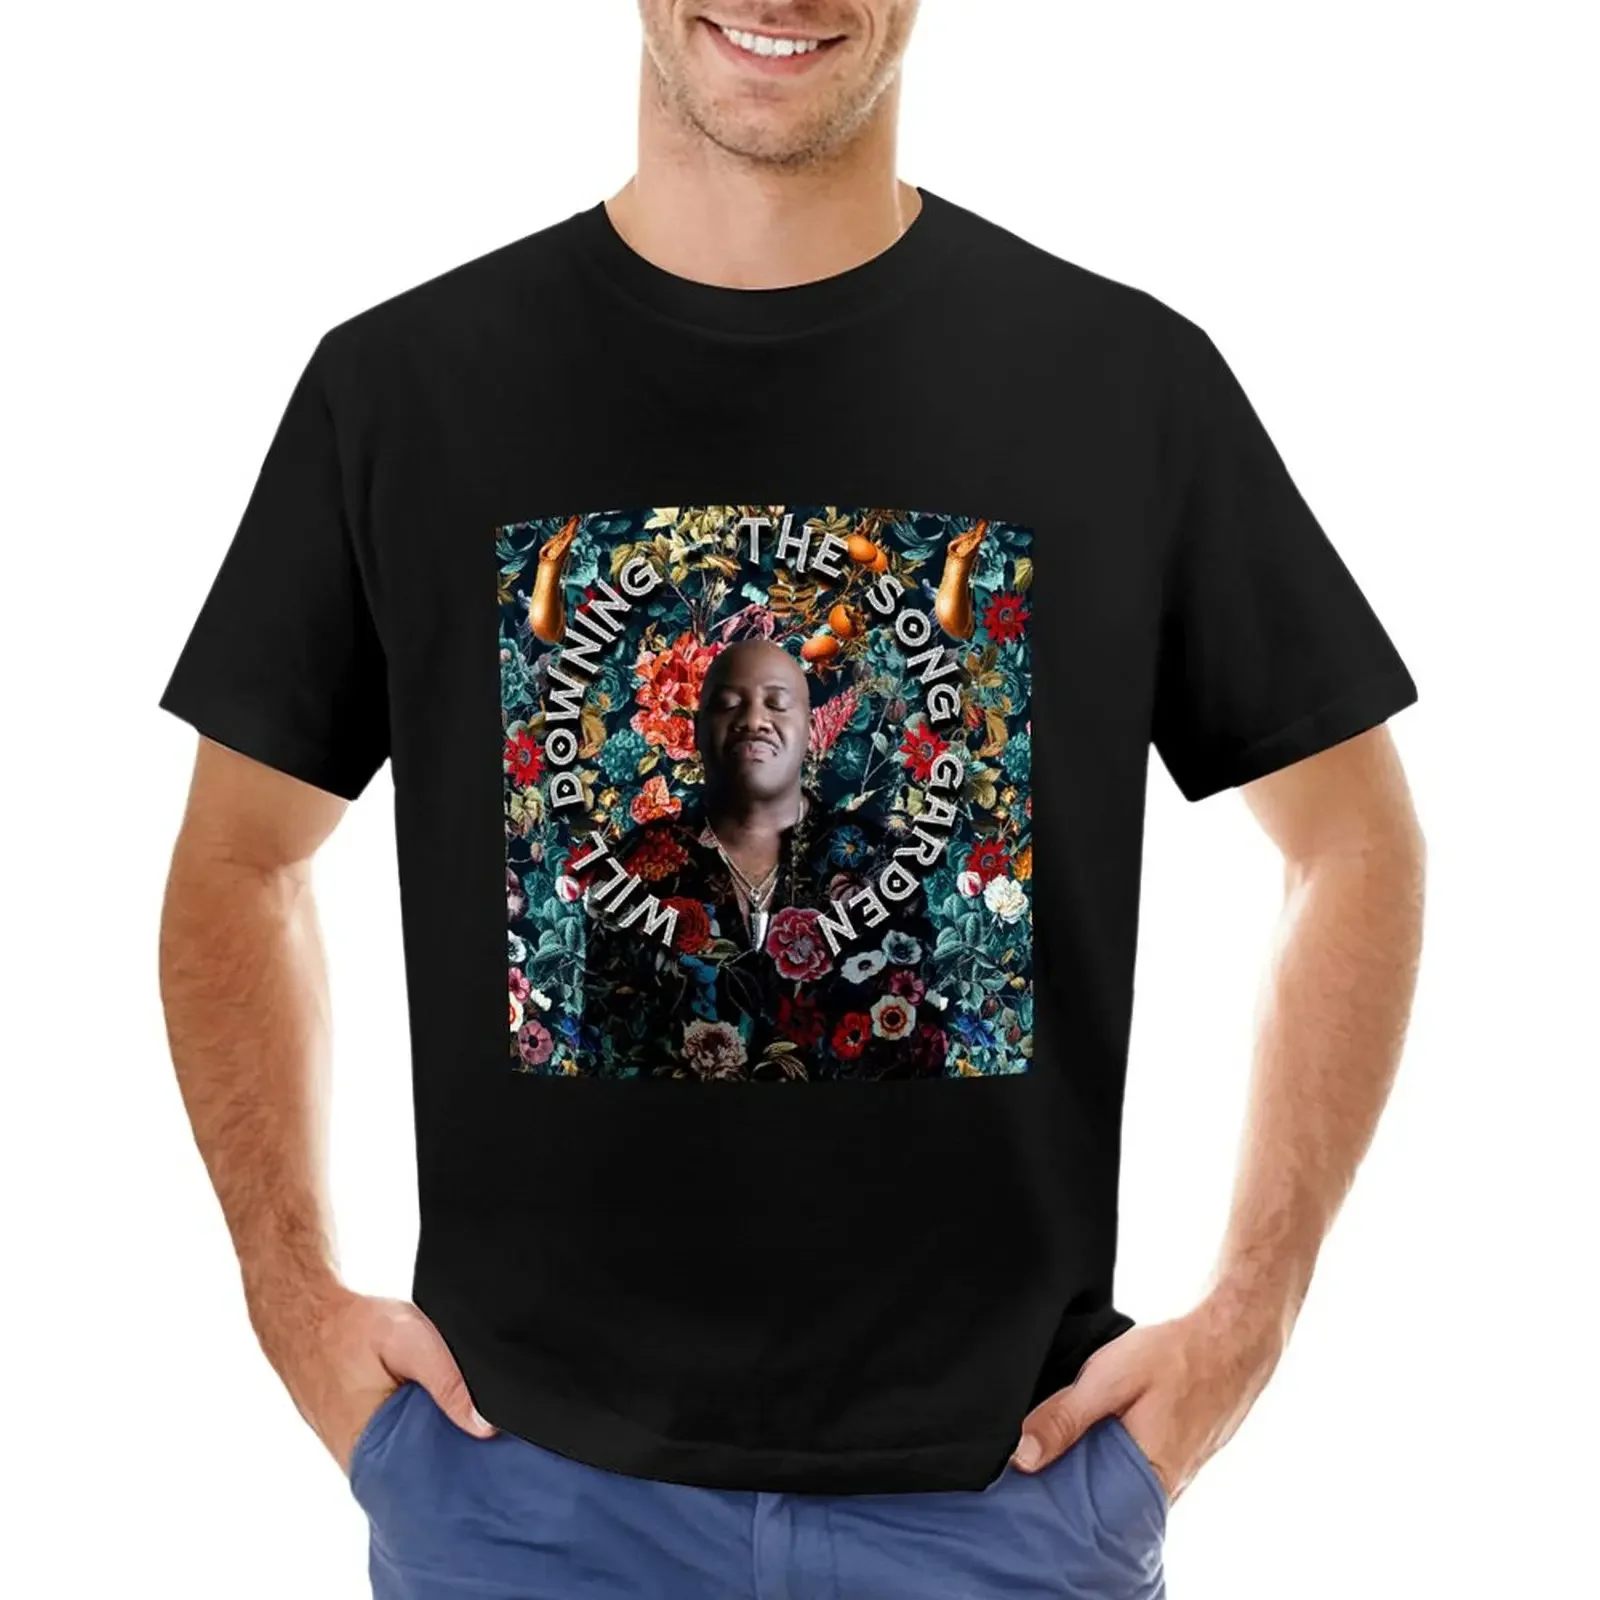 

Will Downing The Song Garden T-Shirt summer top cute clothes plus sizes customs heavyweight t shirts for men